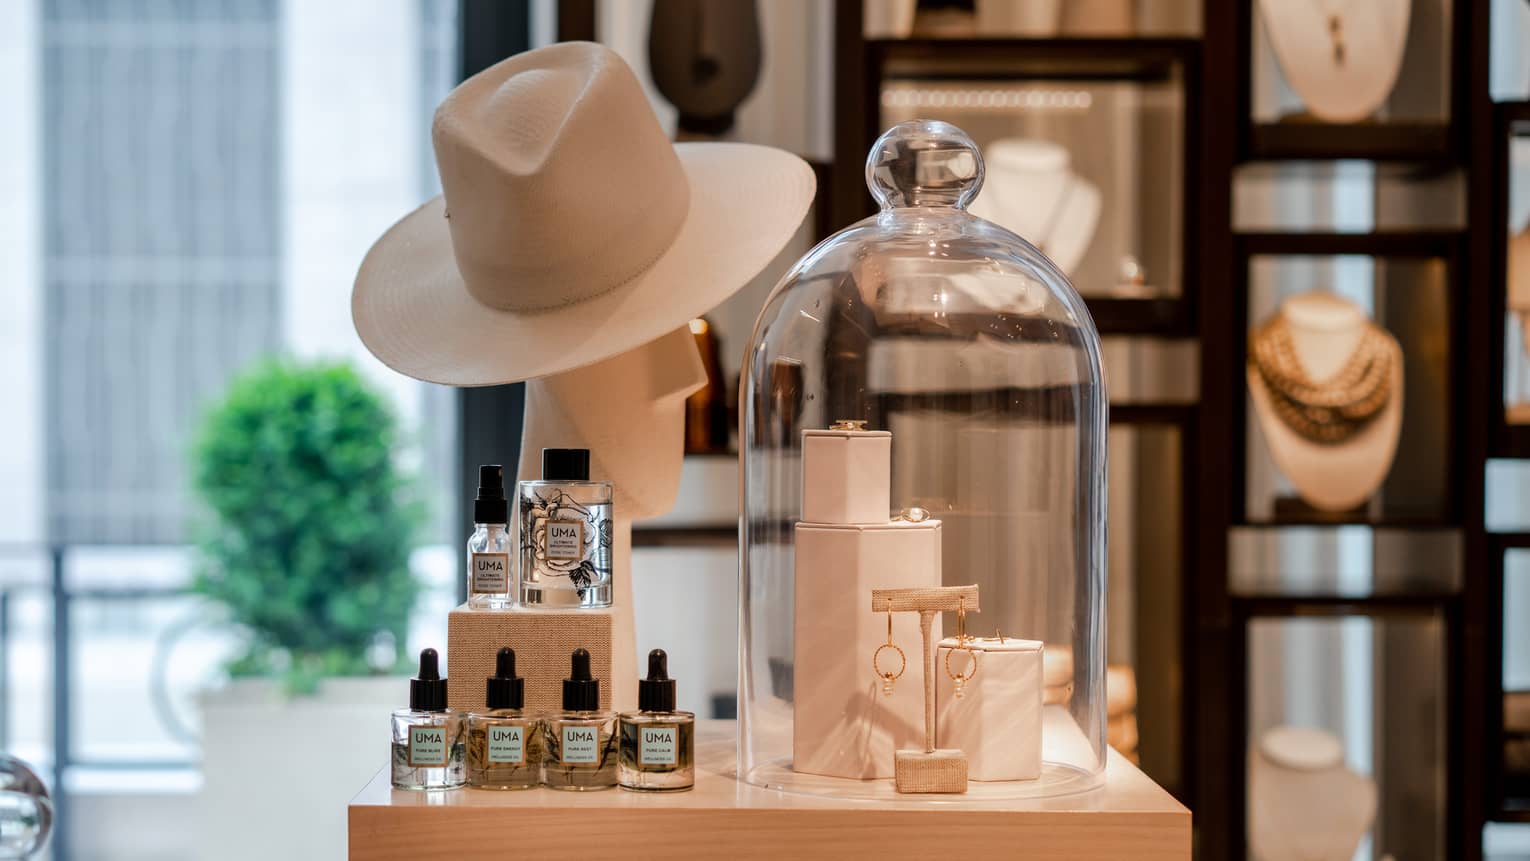 A boutique display of gold jewelry, a beige wide-brimmed hat, and wellness skin care products